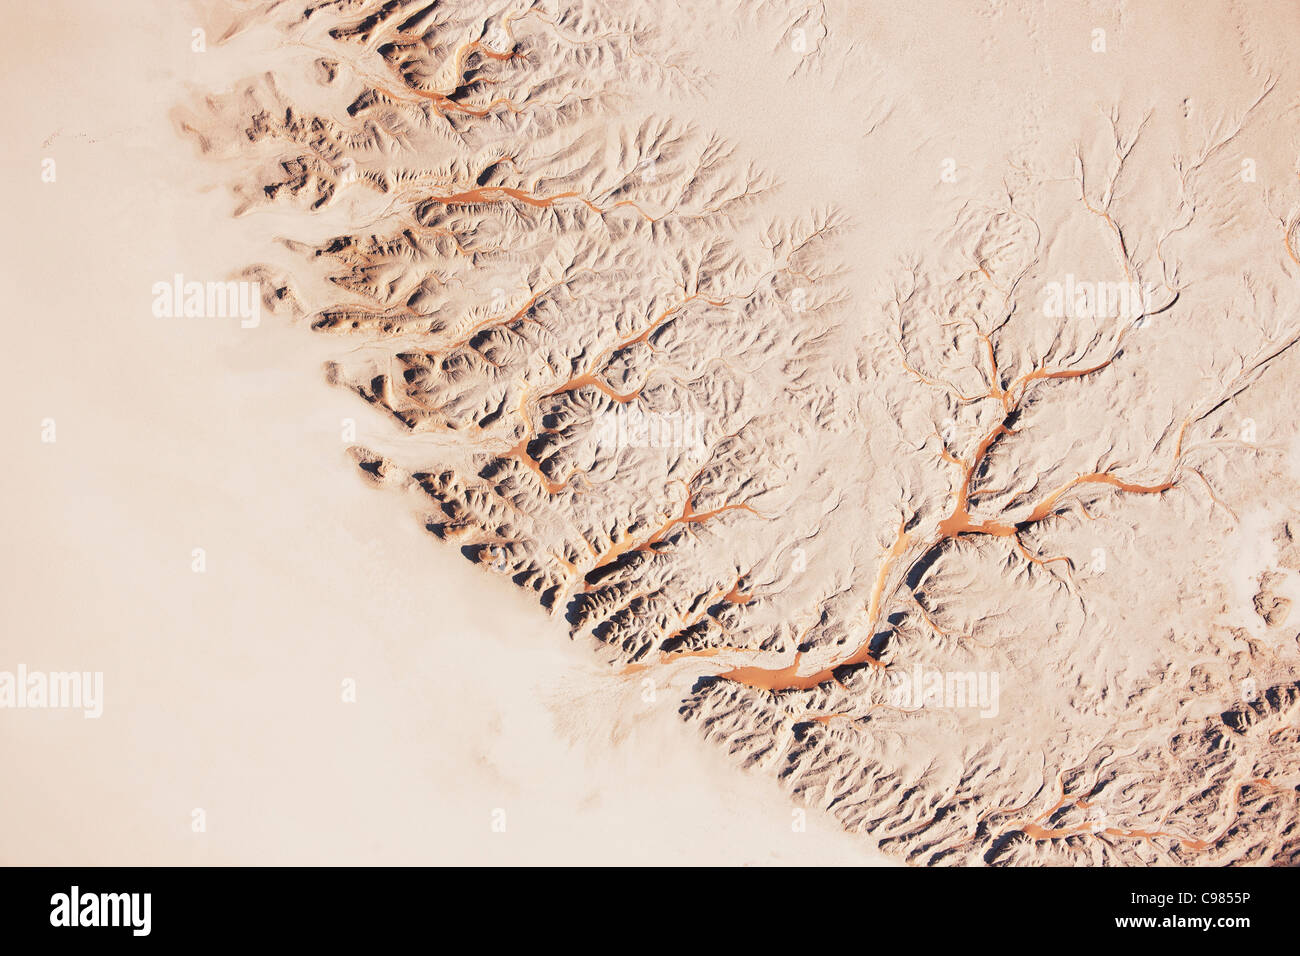 Aerial view of Hidden Vlei with erosion patterns Stock Photo